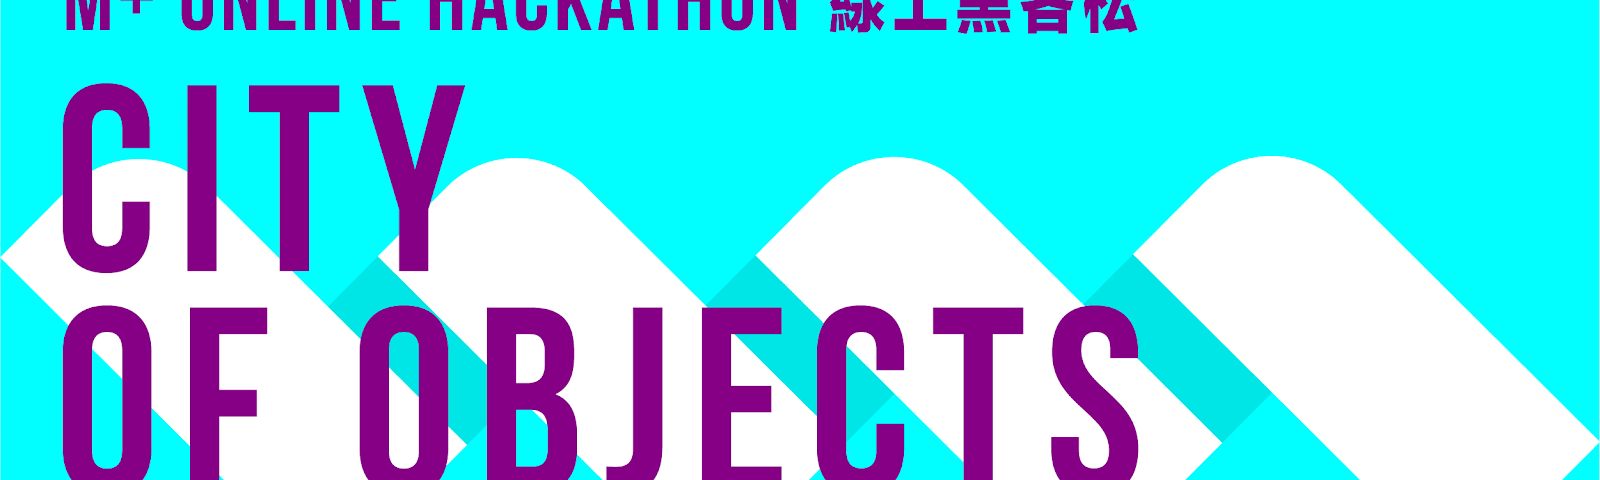 Promotional banner in a turquoise background with a horizontal row of short white stripes through the centre and purple text